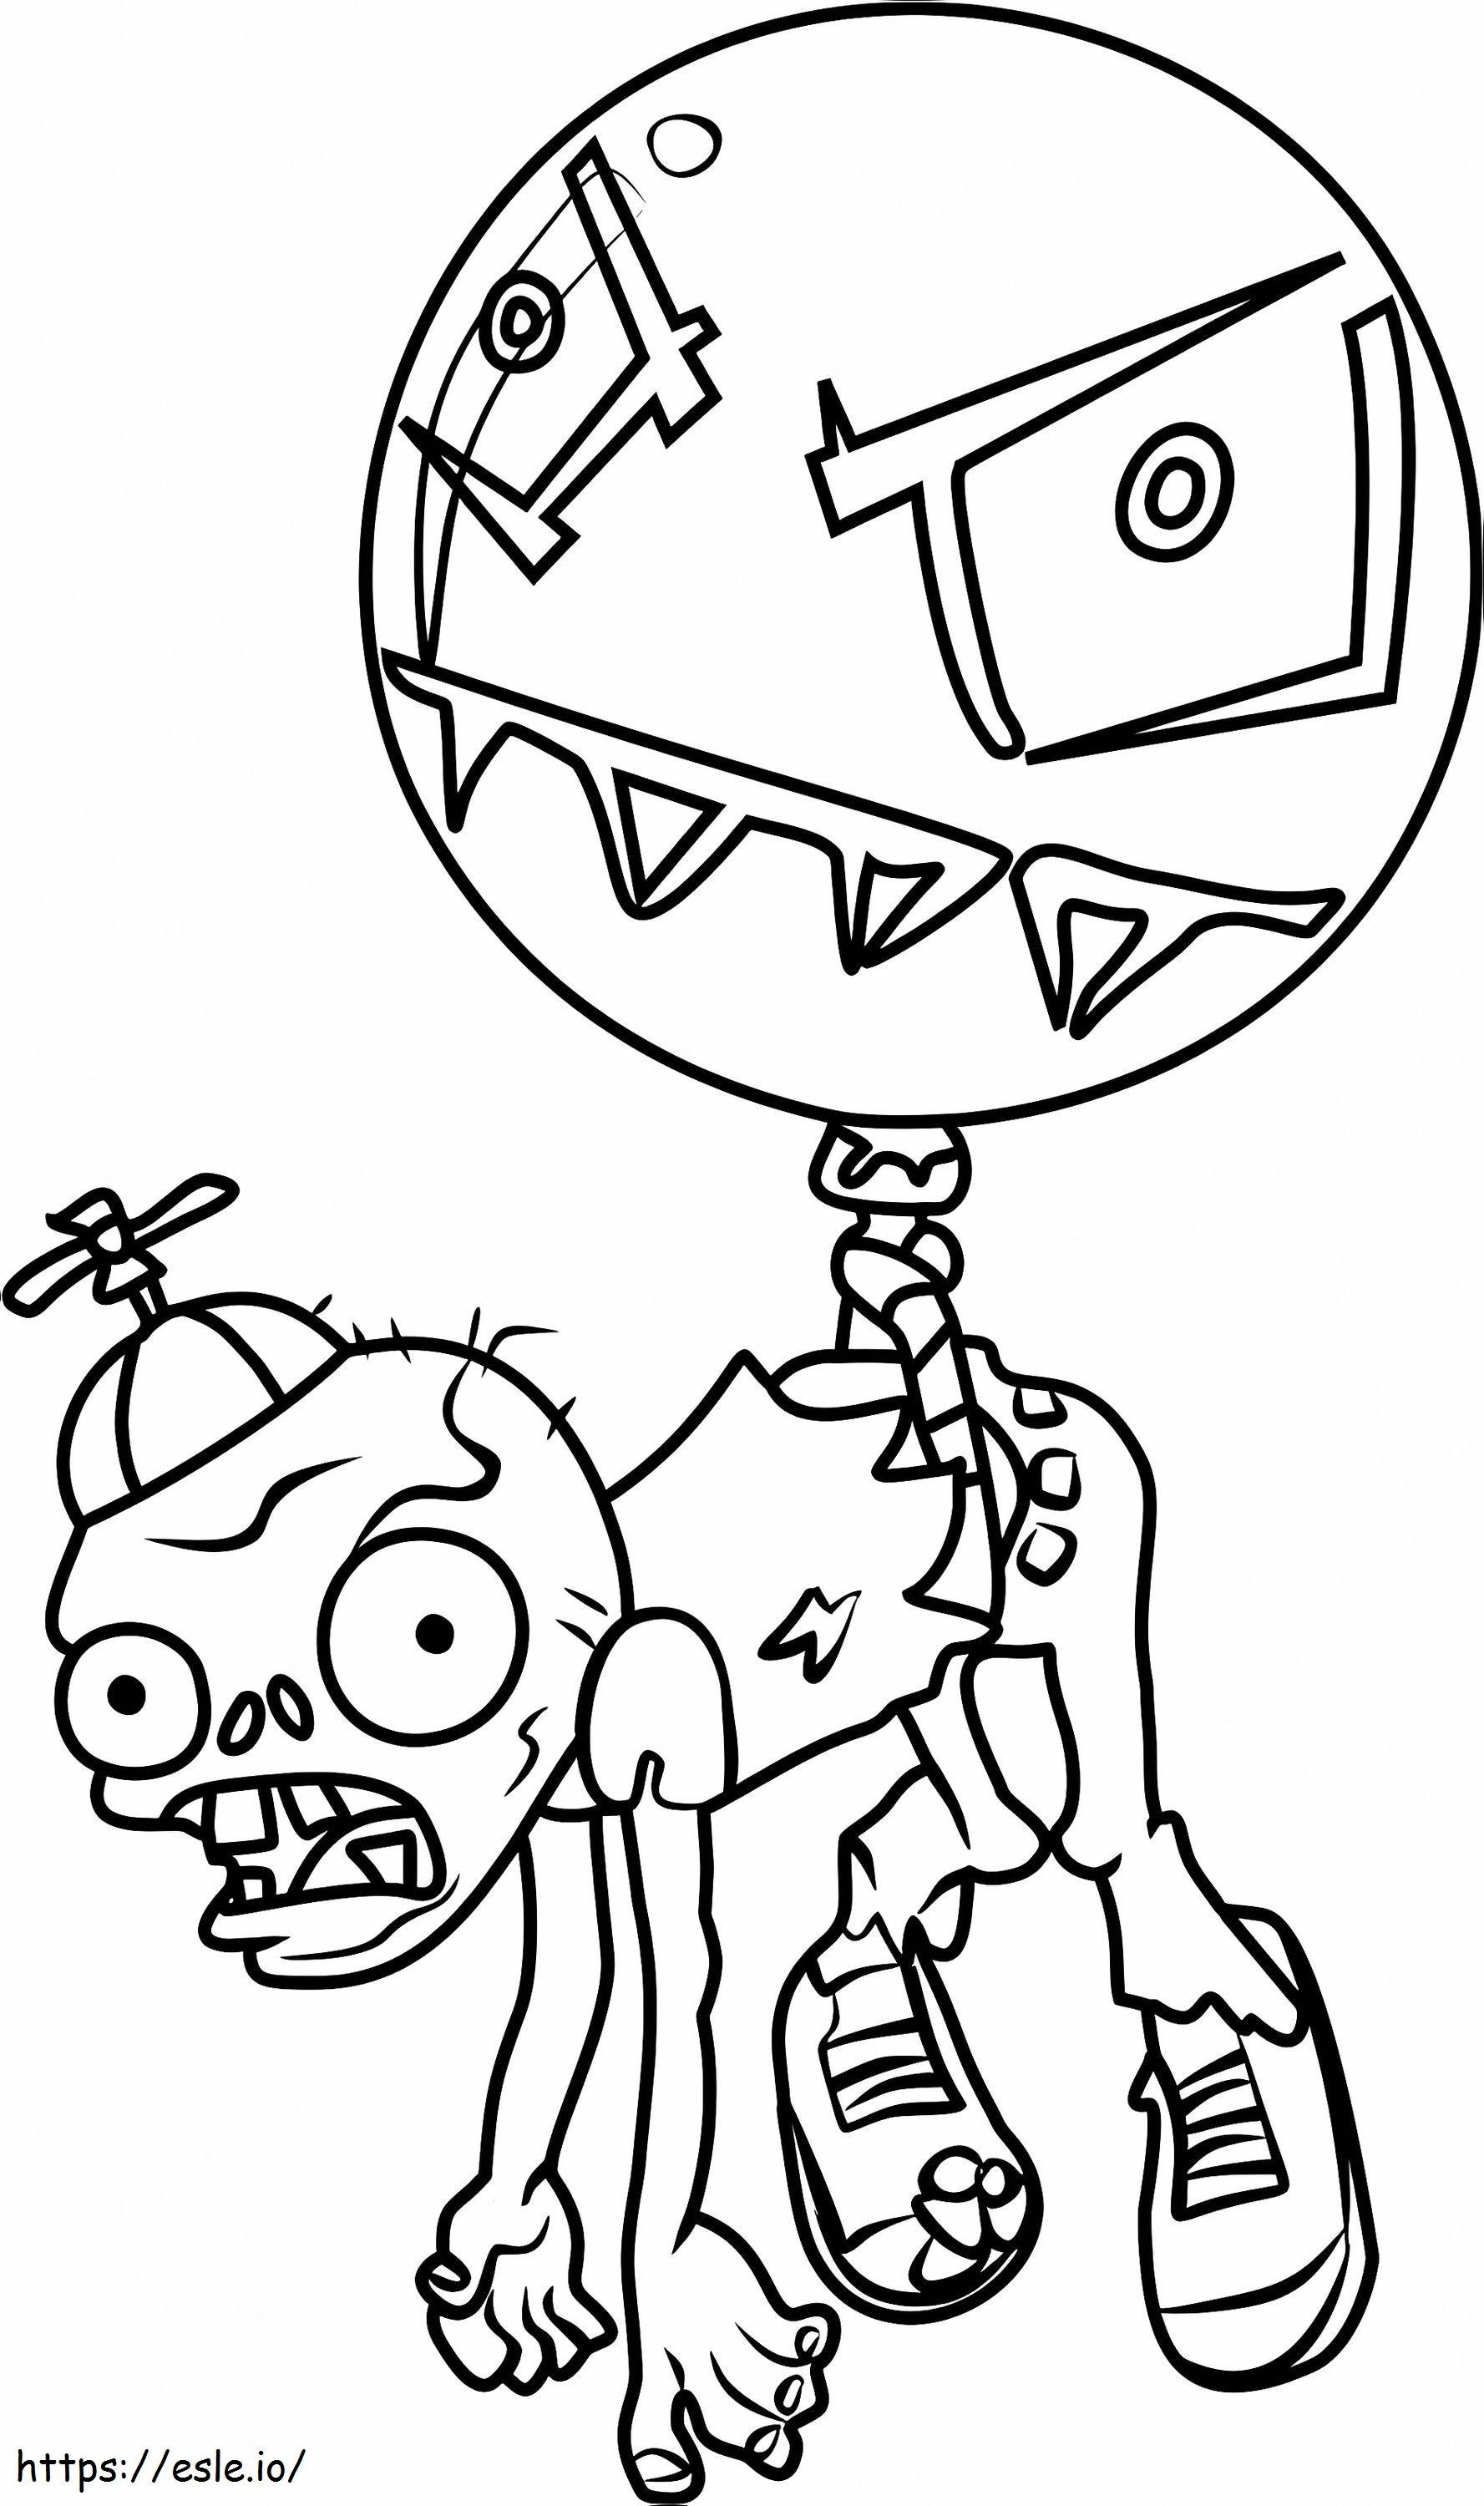 1530063341 60 coloring page